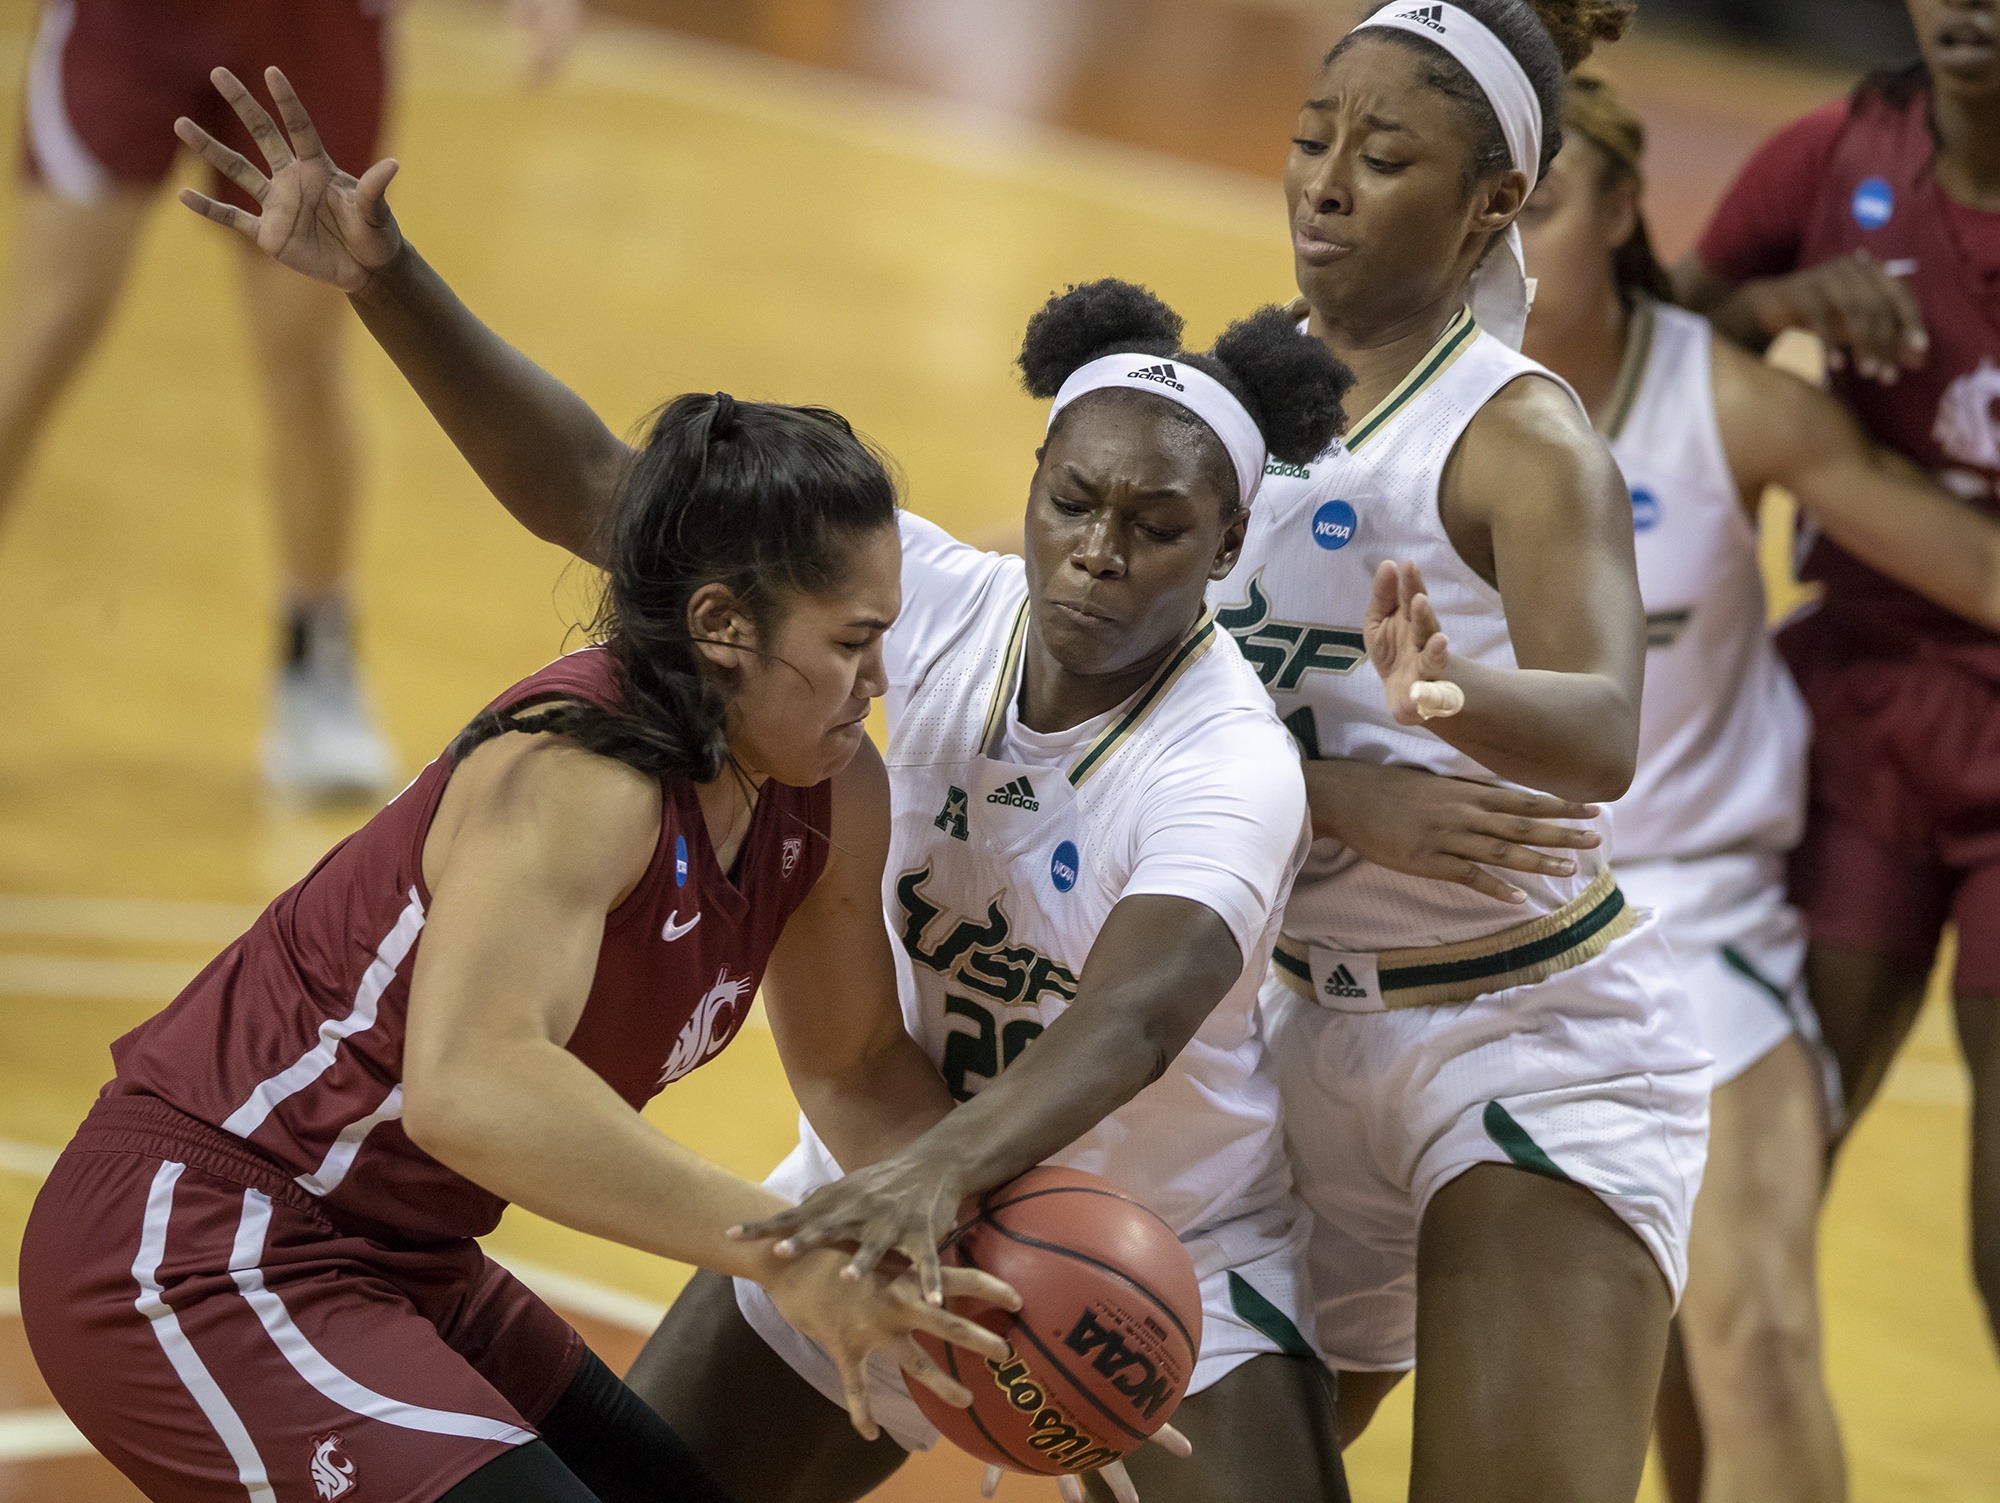 Washington State forward Ula Motuga (15), left, drives against South Florida forward Bethy Mununga (20), center, and South Florida center Shae Leverett (21), right, during the second quarter of a college basketball game in the first round of the women's NCAA tournament at the Frank Erwin Center in Austin, Texas, Sunday, March 21, 2021. (Ricardo B.